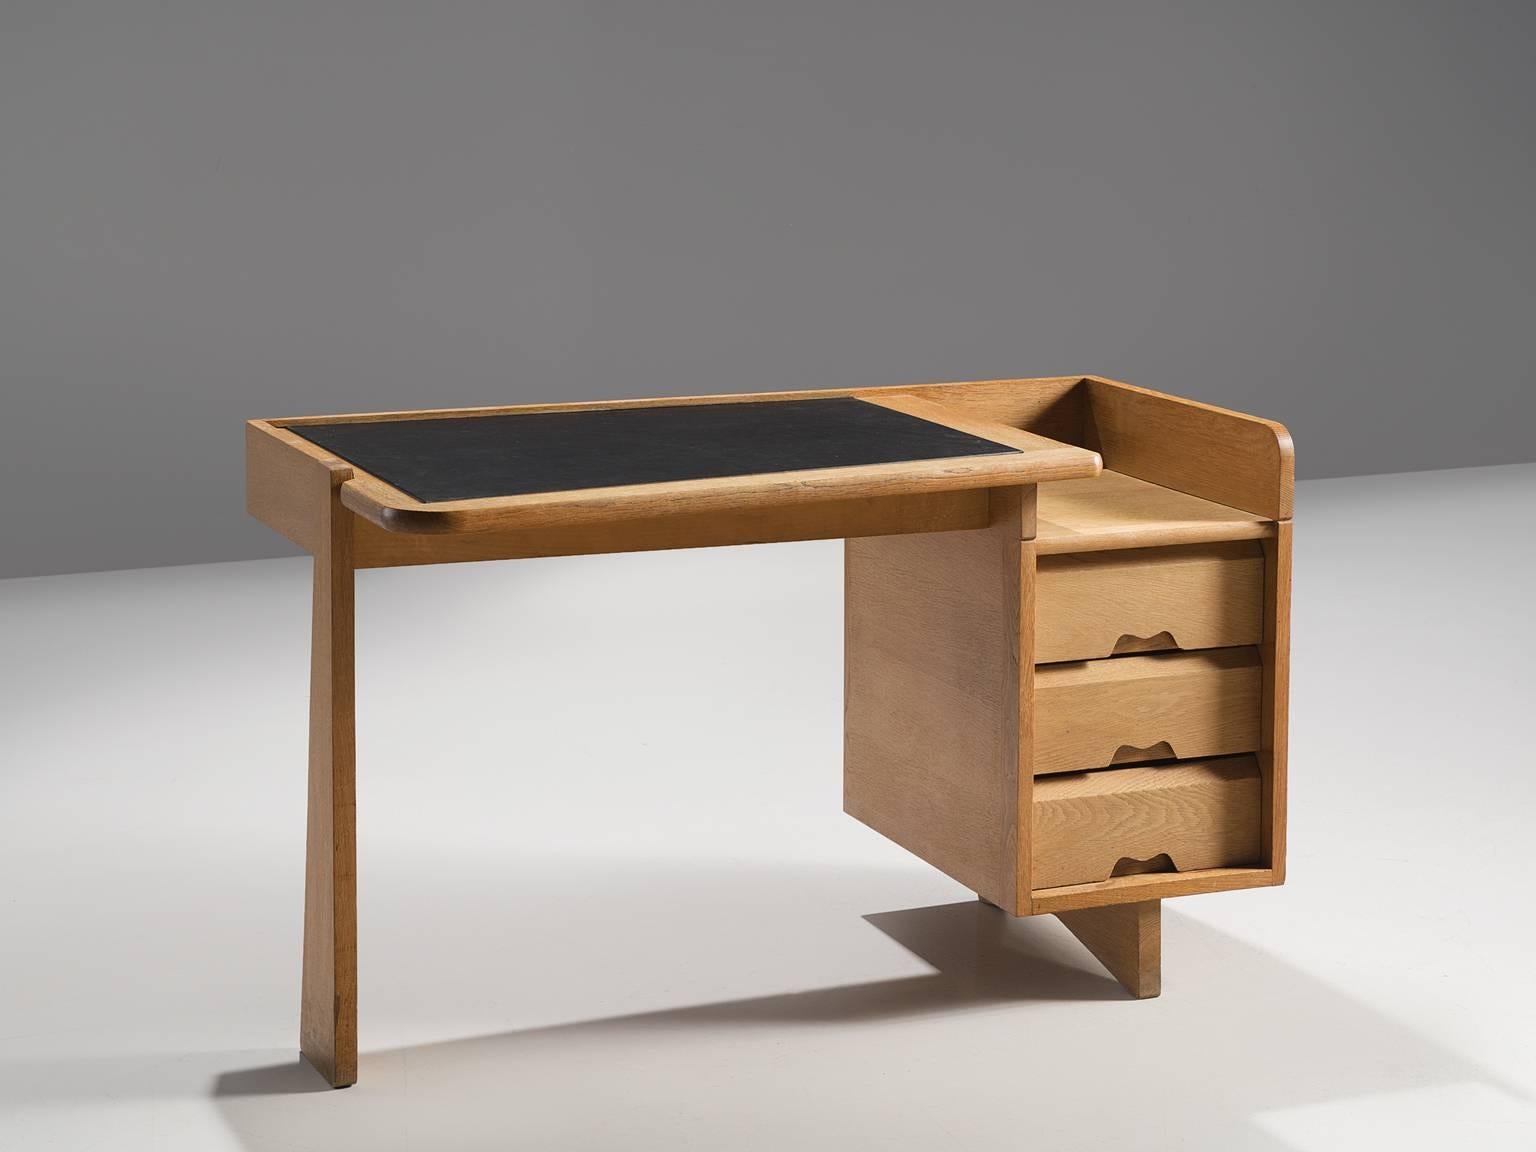 Guillerme et Chambron, desk, oak and leather, by France, 1960s. 

This small desk is designed by the French designer duo Guillerme and Chambron. This writing desk holds the characteristic decorations and lines of this duo such as the decorative